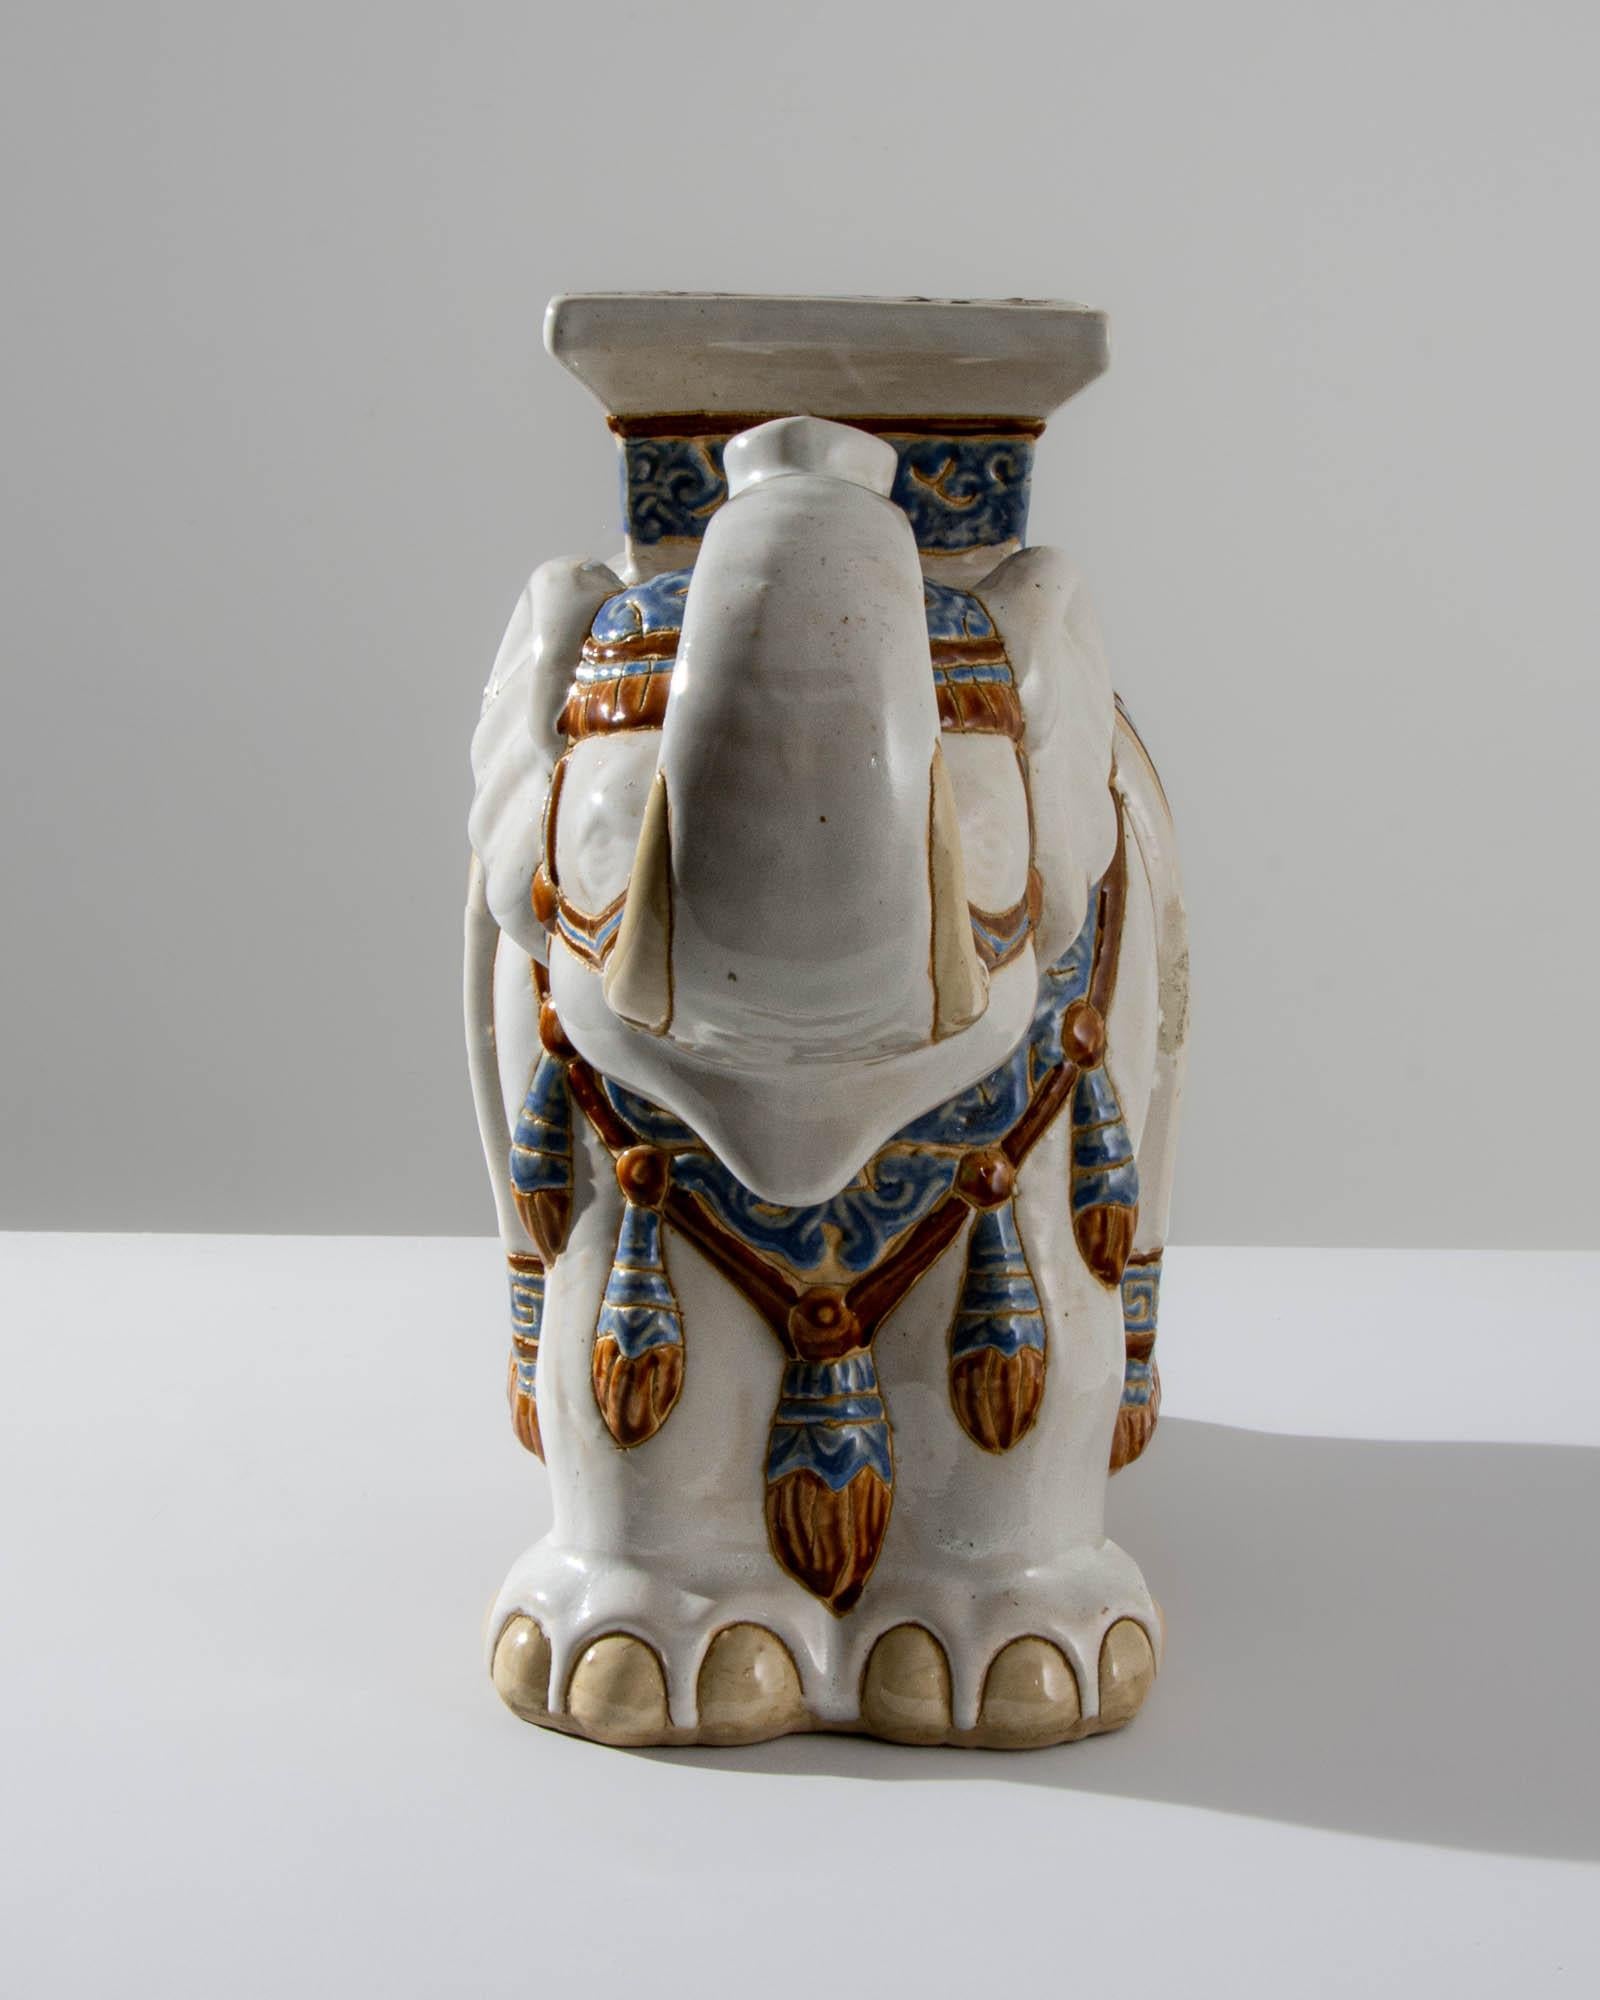 A ceramic decoration from 1960s France in the shape of an elephant. Painted with a white glaze laced with powder blue and yellow ochre; the saddle, seat and blanket are delicately patterned — reflecting Chinese and Arabic influences — suggesting the